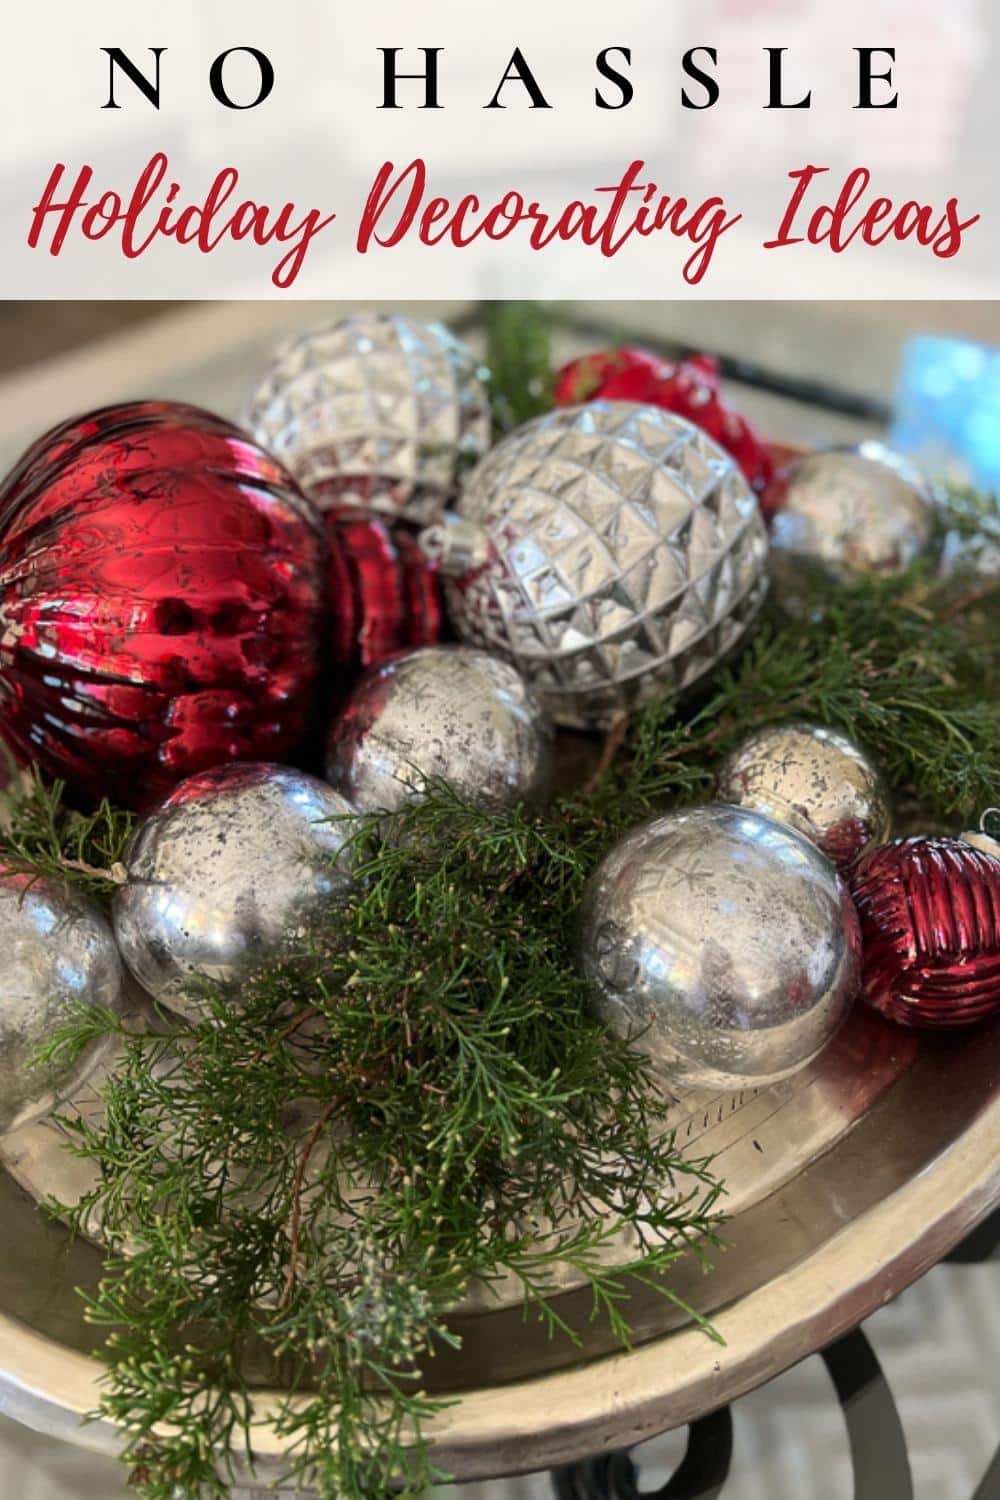 No Hassle Holiday Decorating Ideas For When You Don’t Feel Like Decorating